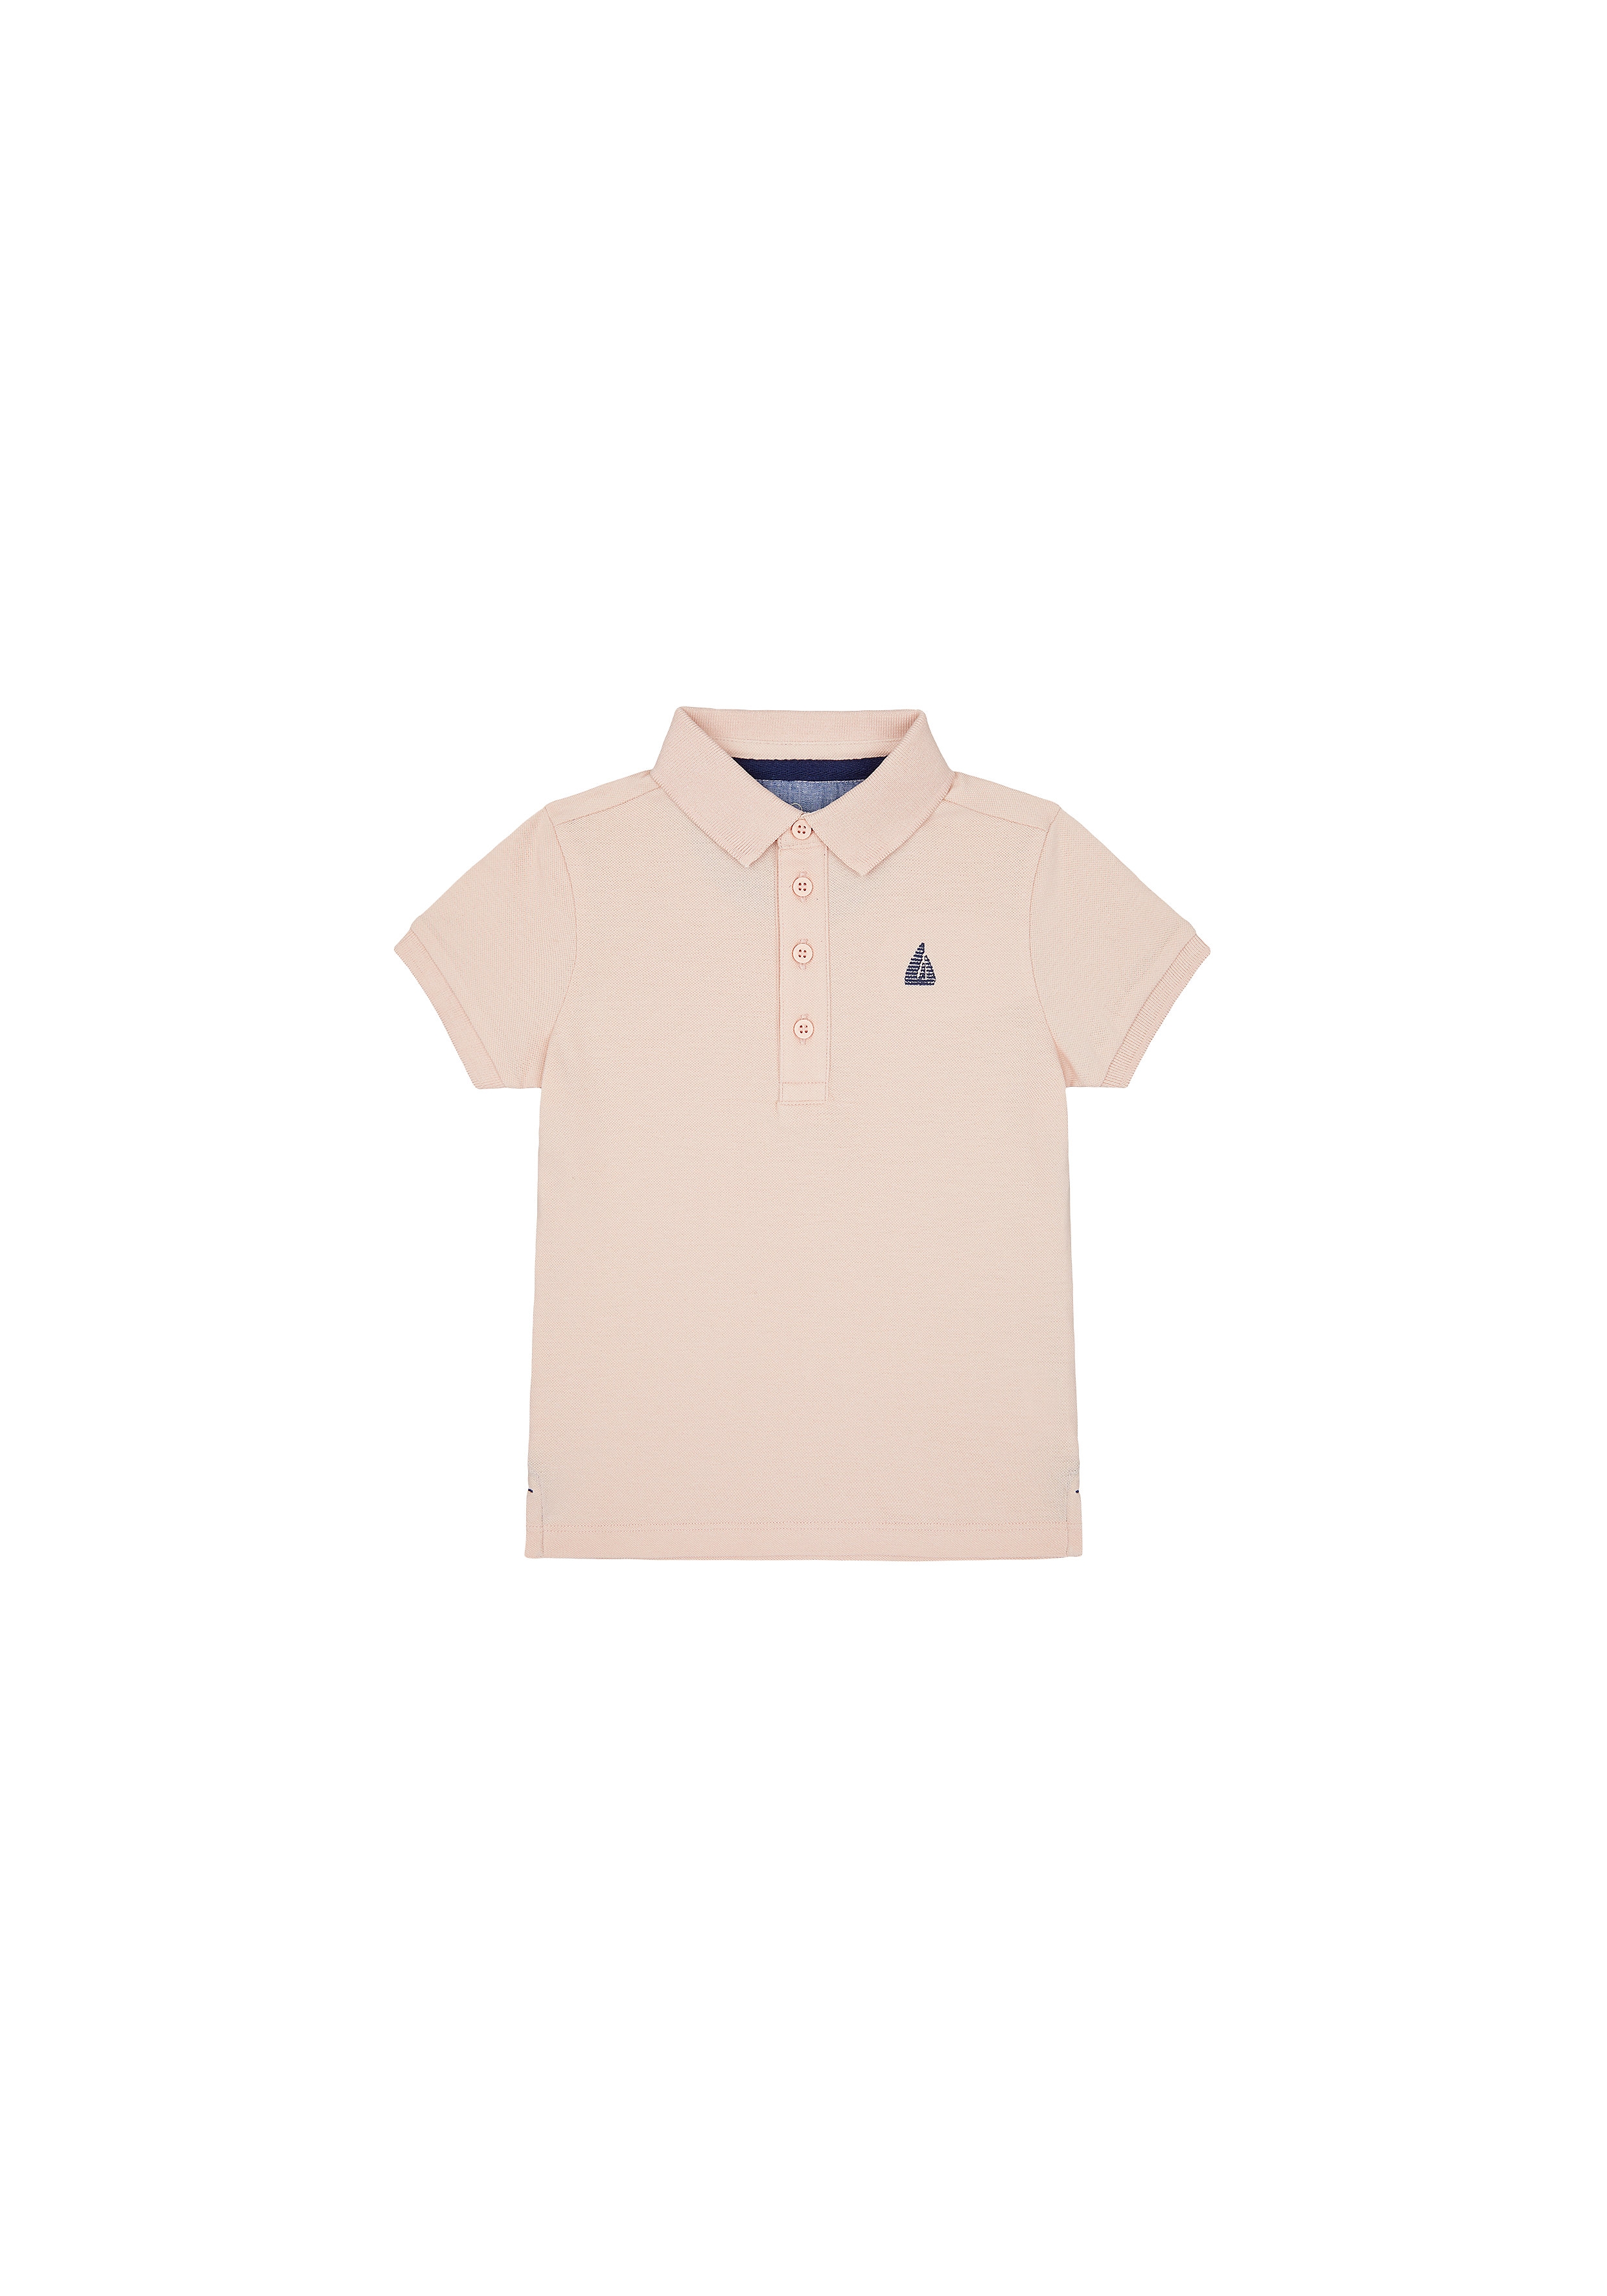 Mothercare | Boys Half Sleeves Pique Polo T-Shirt Boat Embroidery - Pink